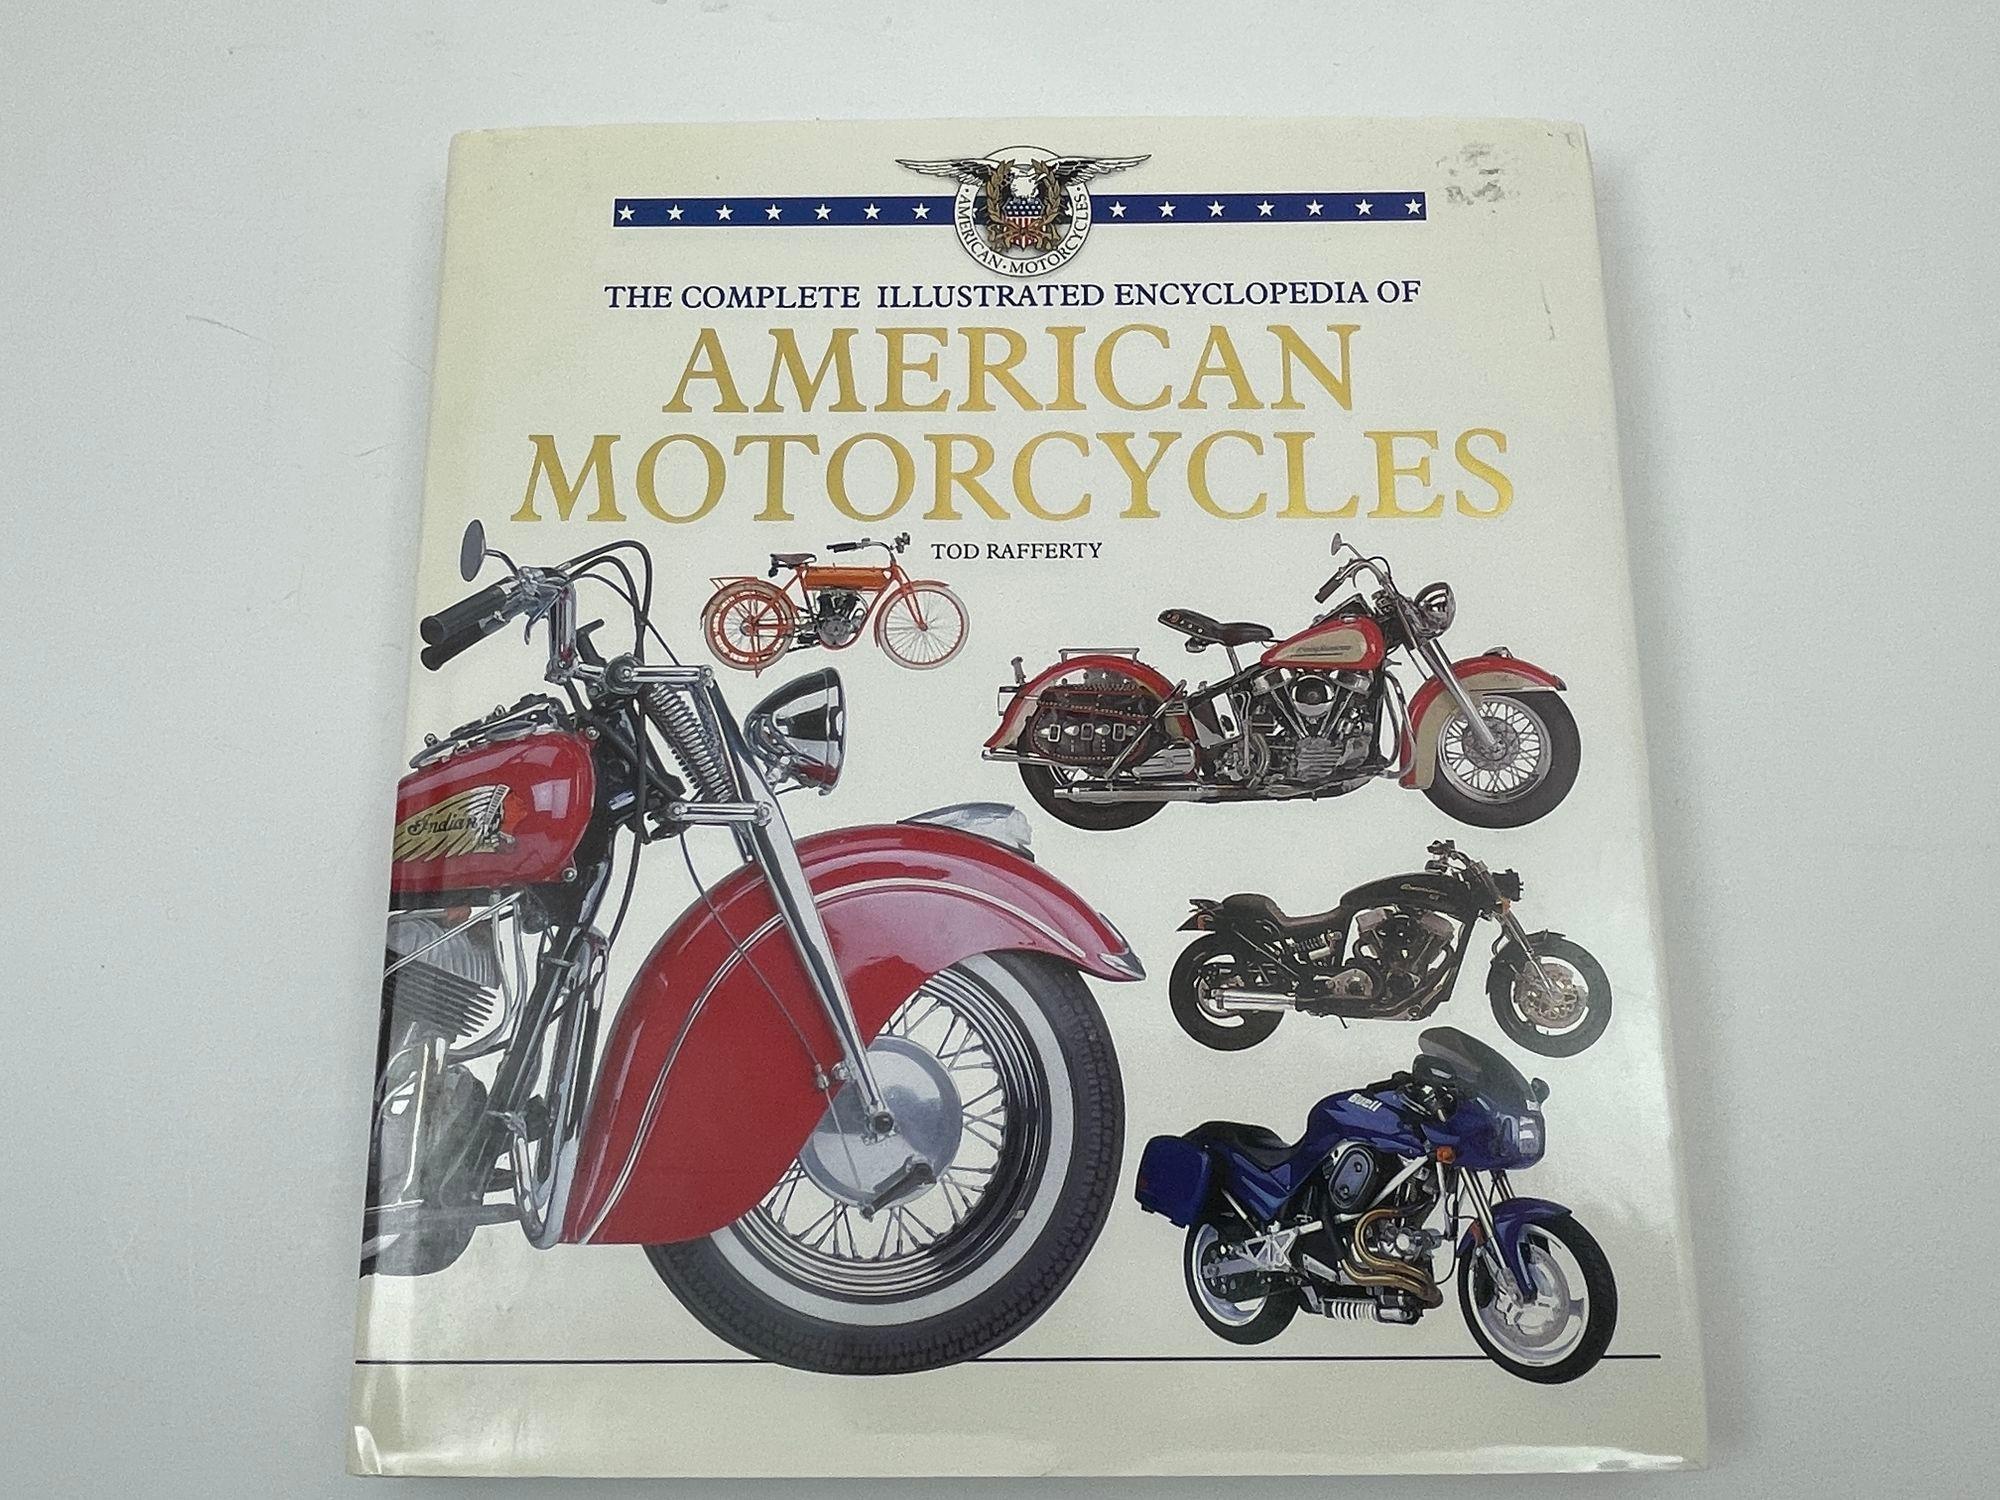 The Complete Illustrated Encyclopedia of American Motorcycles by Tod Rafferty.
This lavishly illustrated history winds its way through the 20th century by exploring such popular American motorcycle manufactures as Pope, Thor and Merkel. Rafferty's